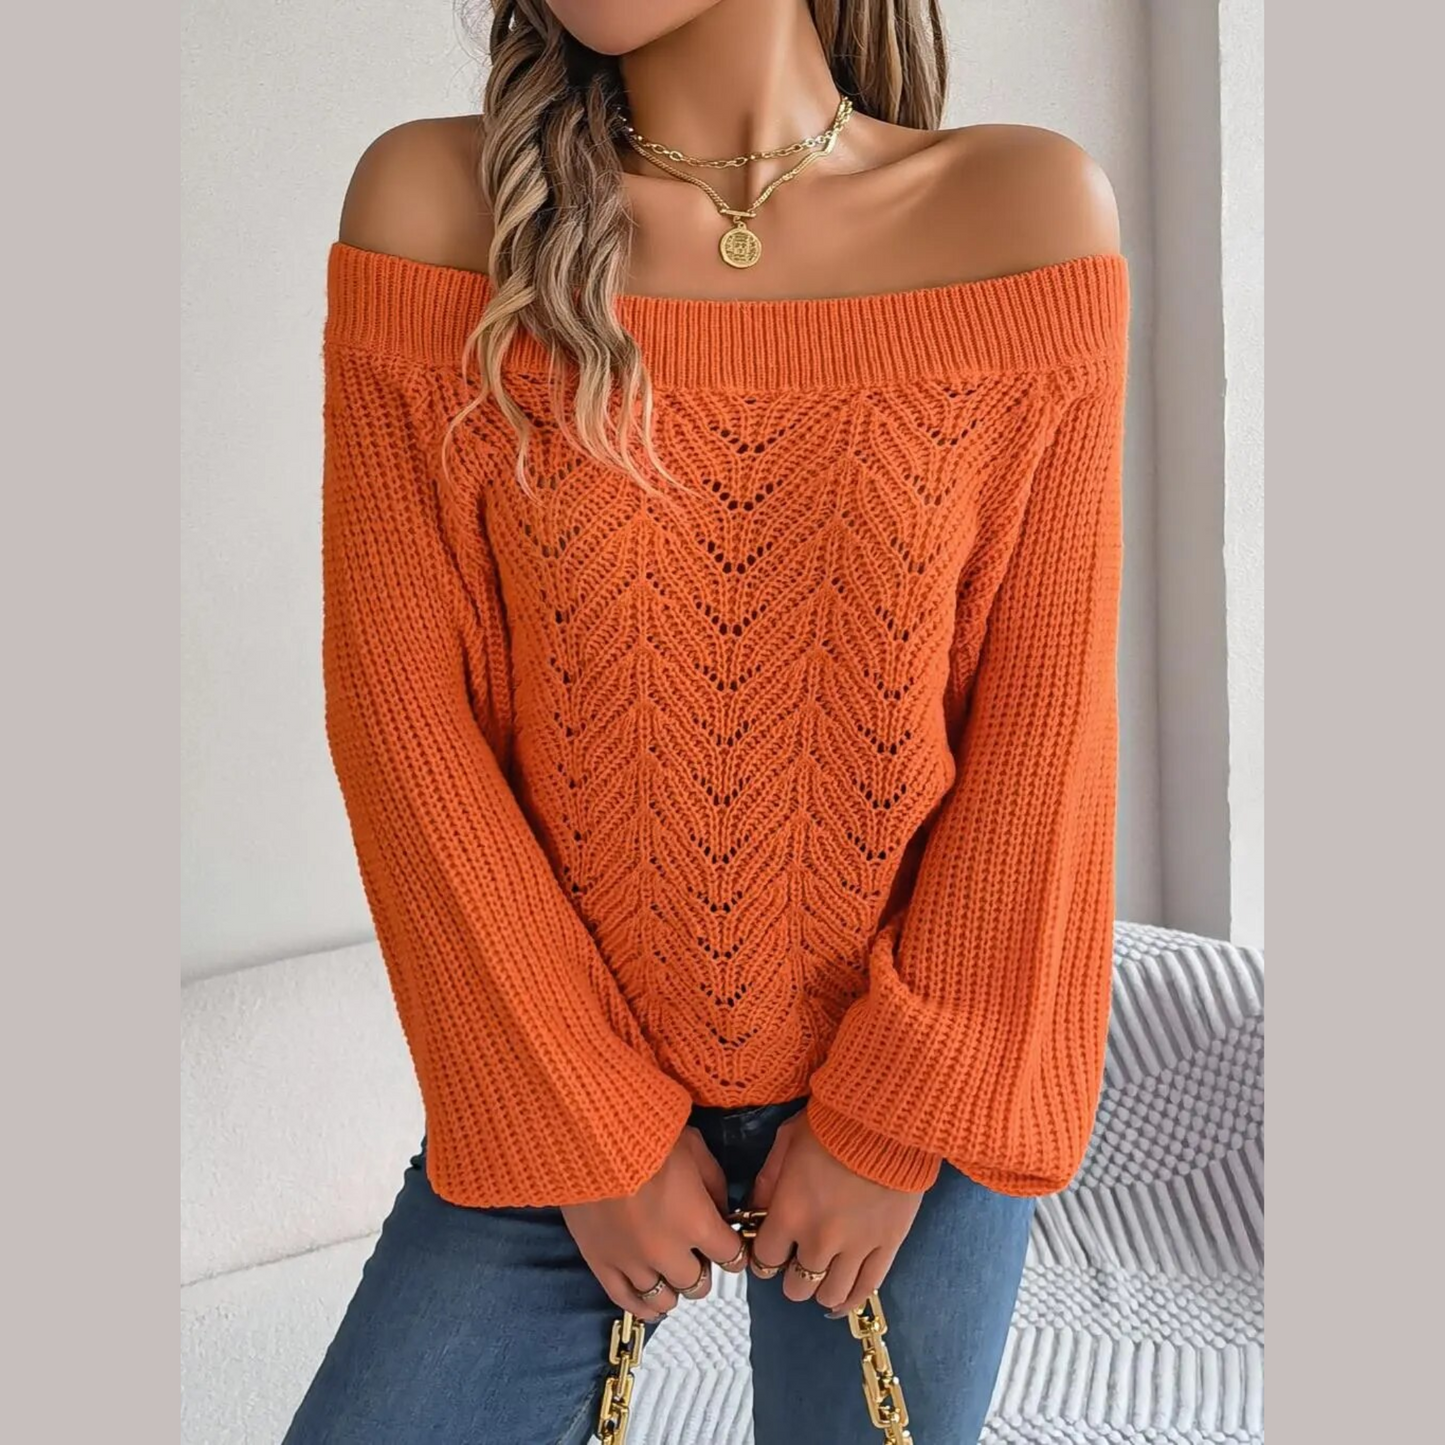 Loni - Orange Knitted Off The Shoulder Sweater Top